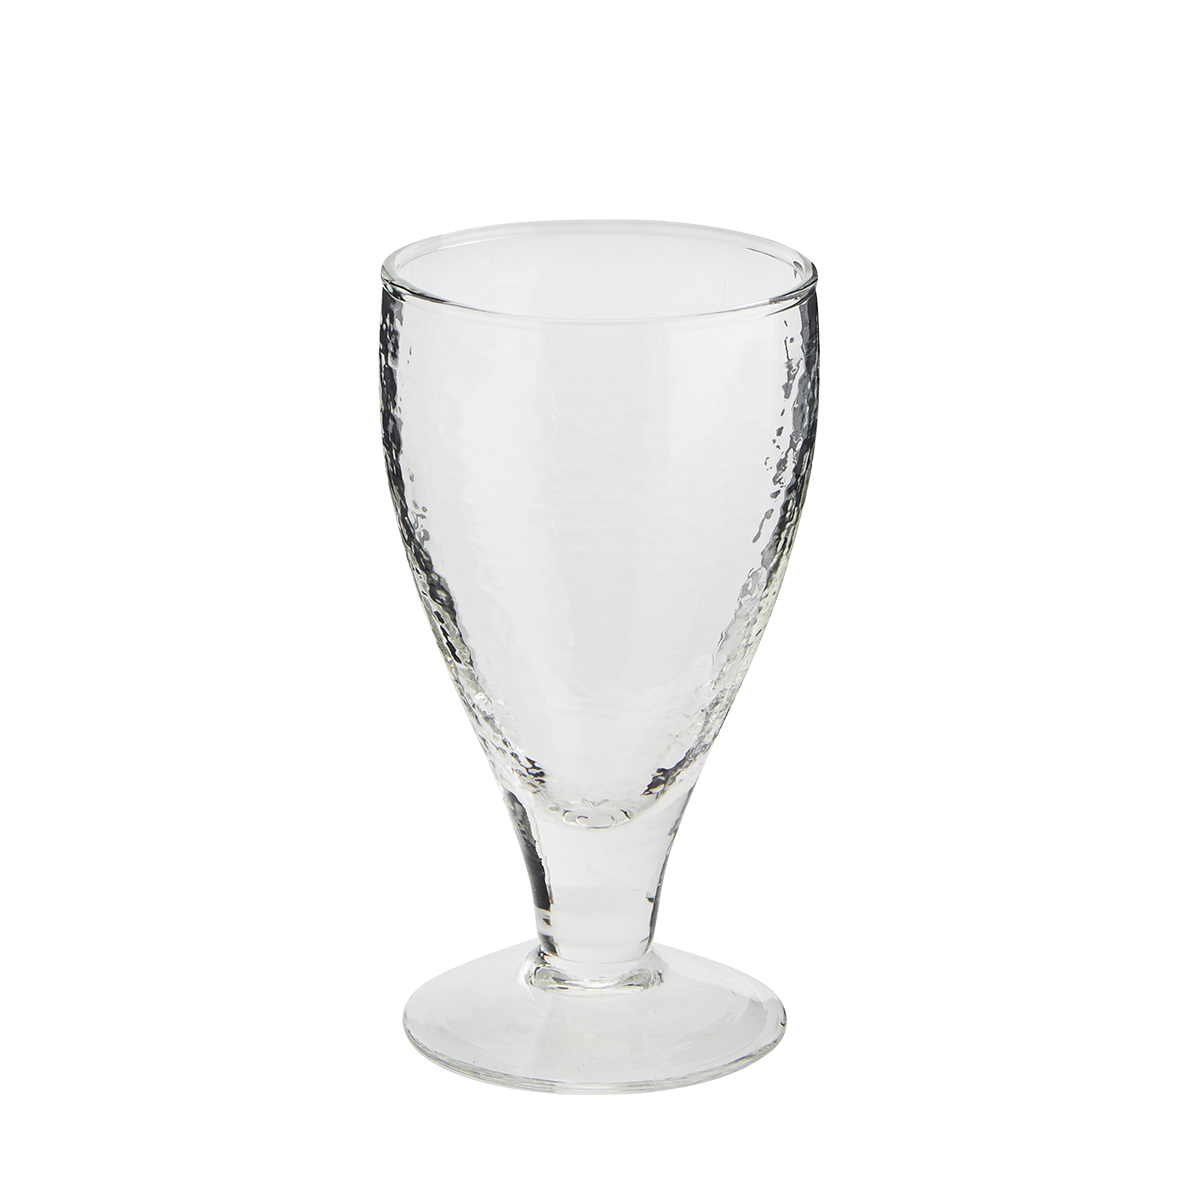 Hammered drinking glass